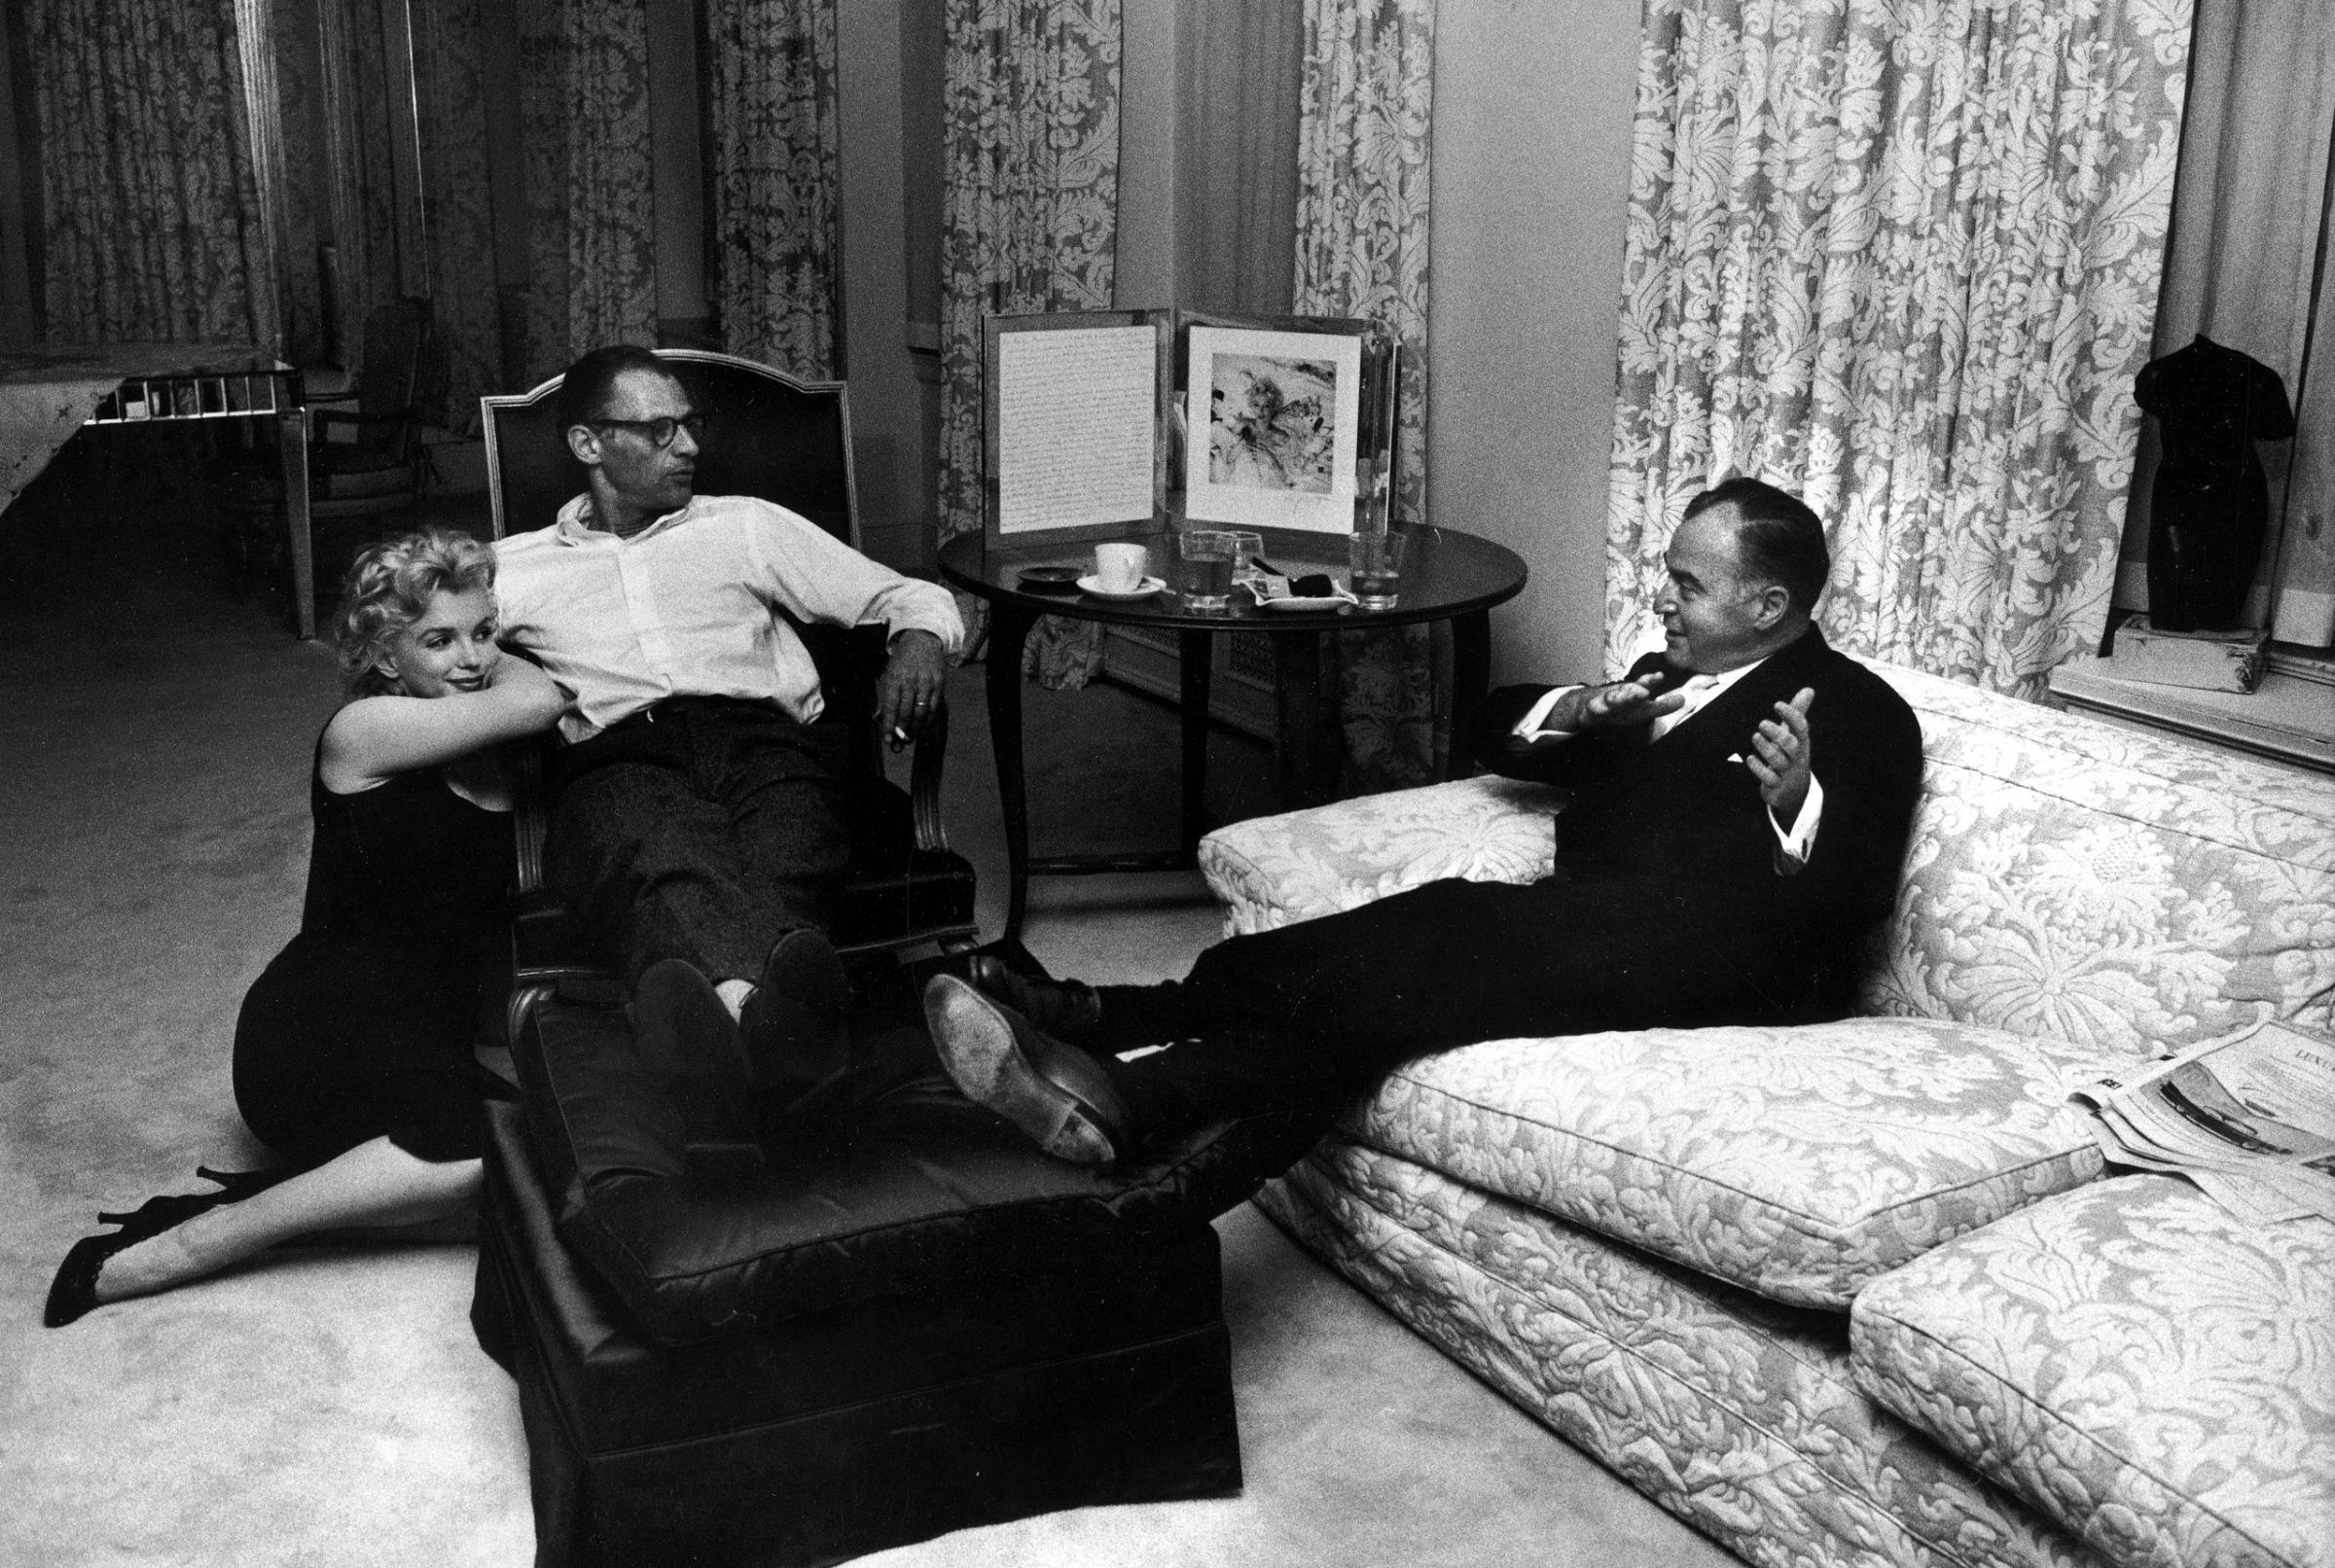 Producer Kermit Bloomgarden (R) visiting with playwright Arthur Miller (C) &amp; his wife, actress Marilyn Monroe, in their apartment, 1958.